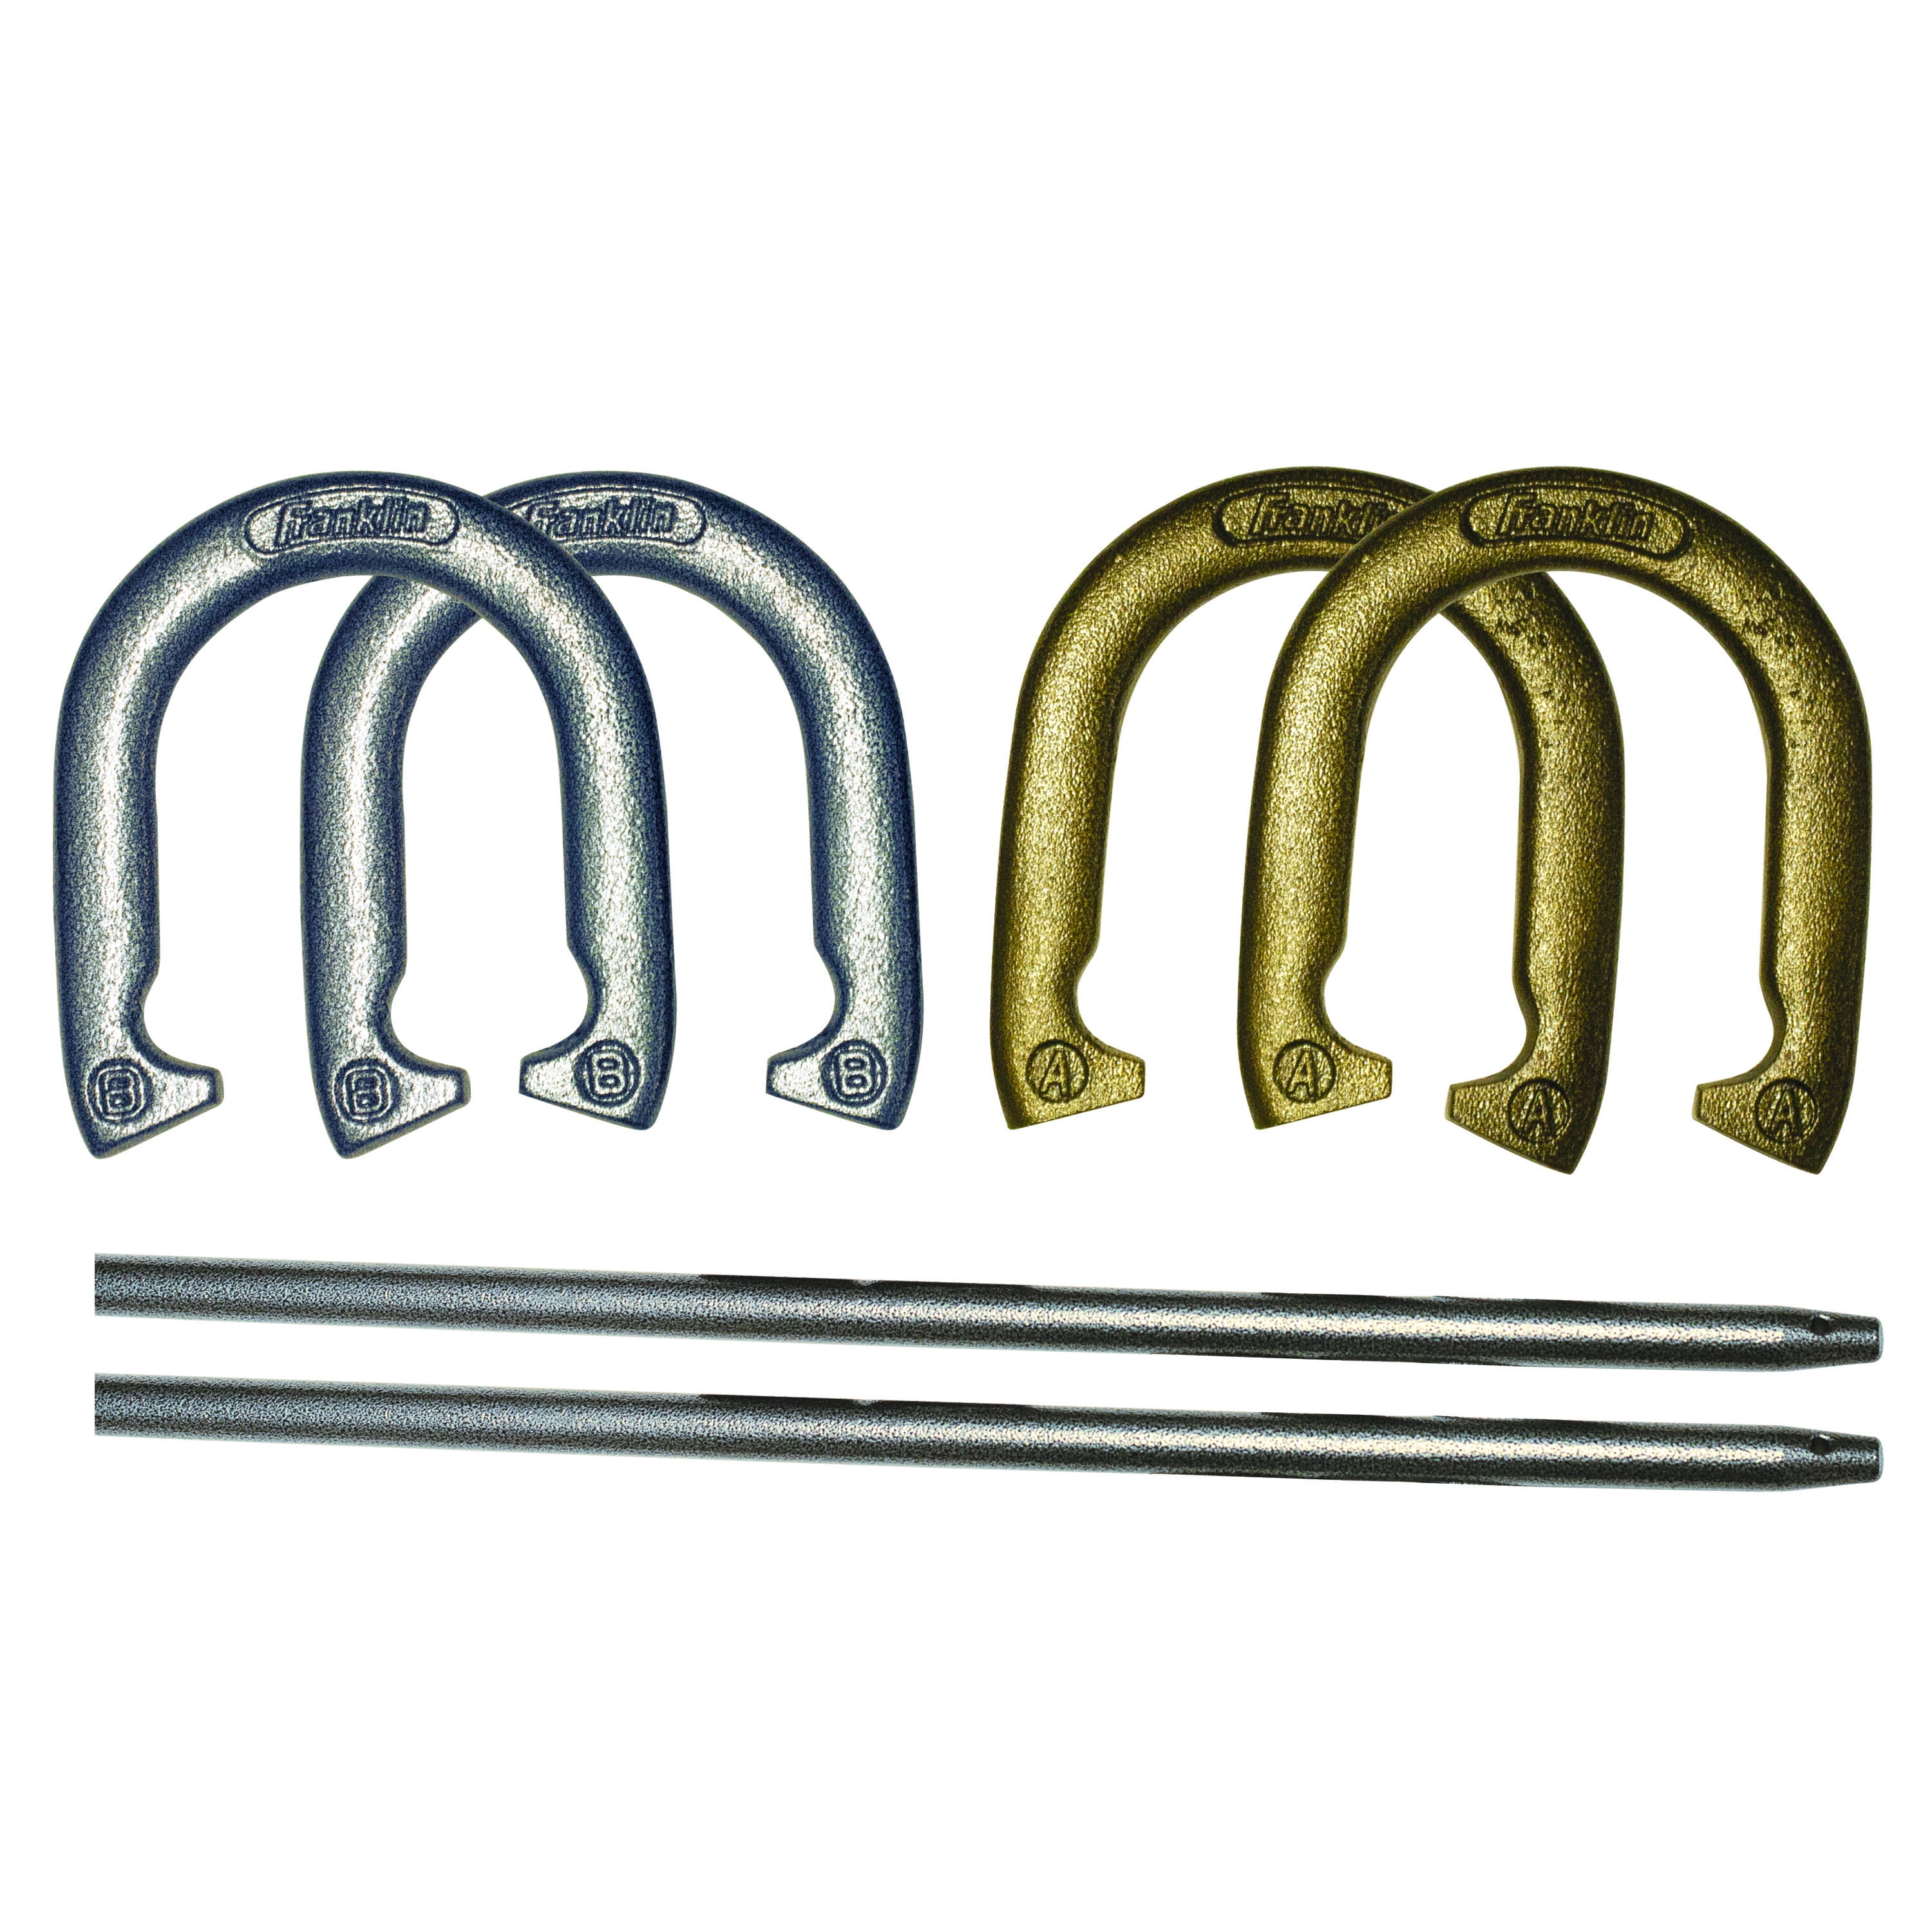 St Pierre Mfg As2 Horseshoes American Professional 2-pair 1 for sale online 